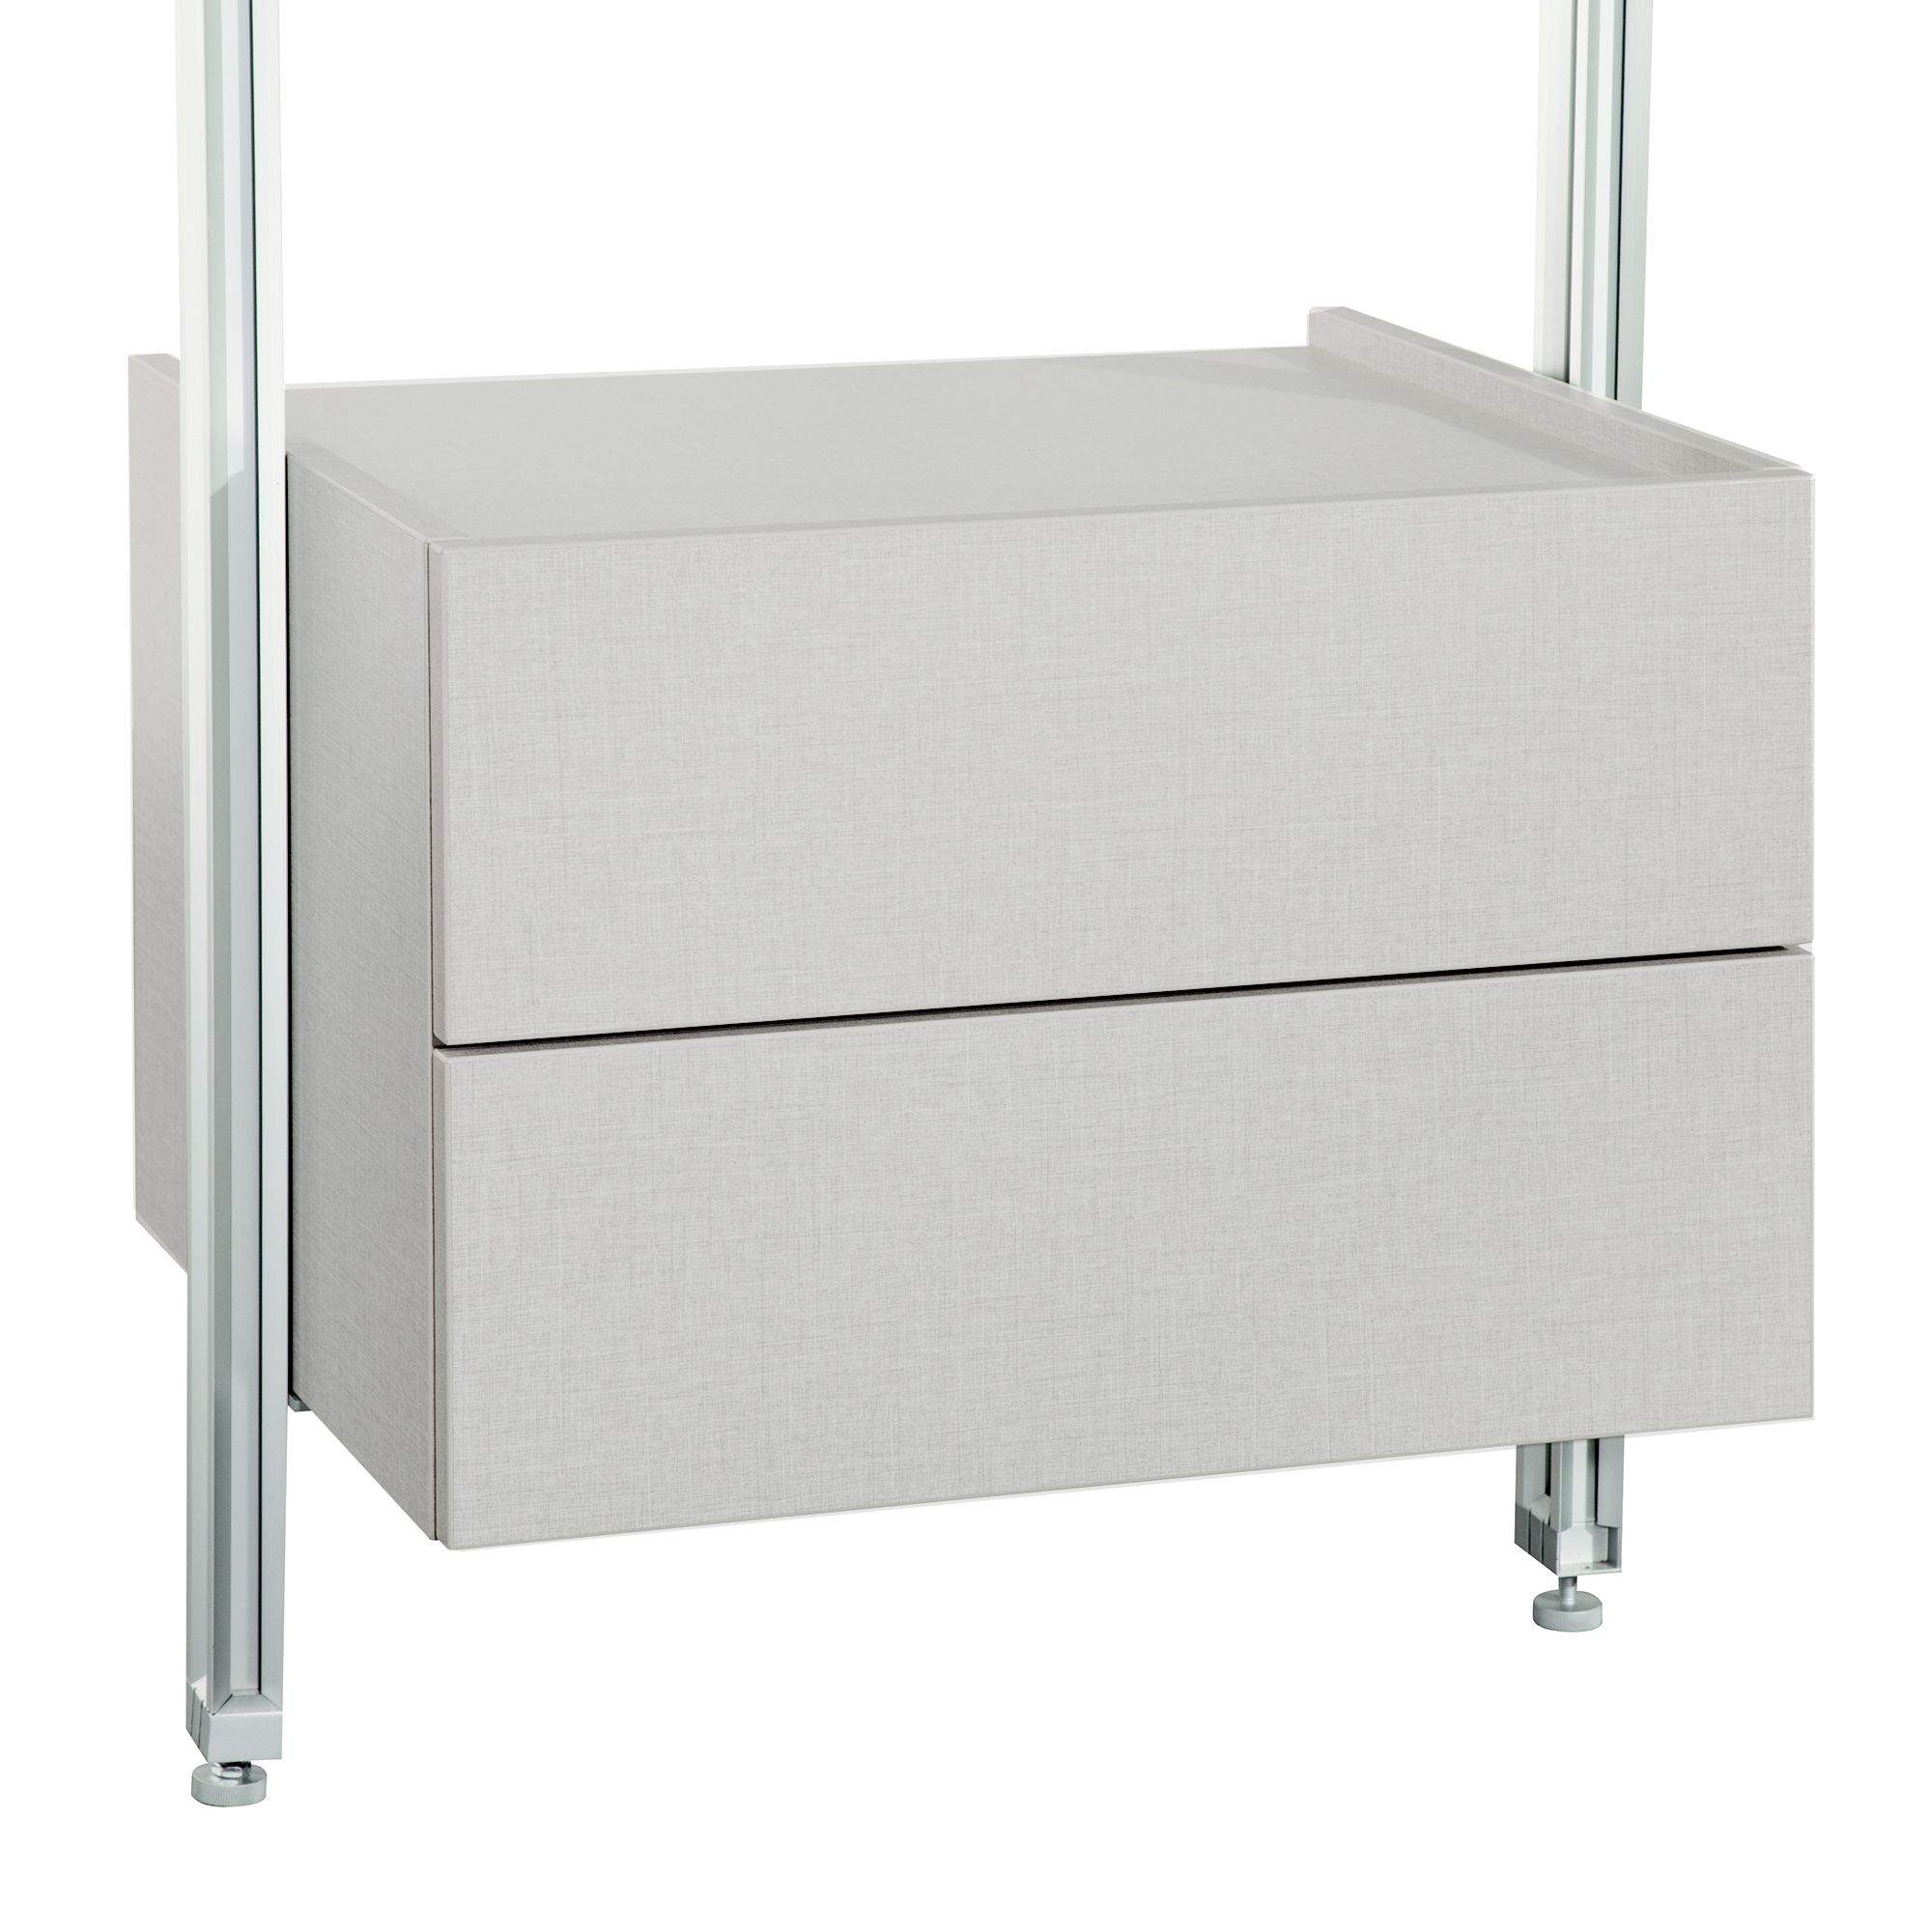 Spacepro Relax Grey linen effect Drawer box (H)380mm (W)550mm (D)500mm